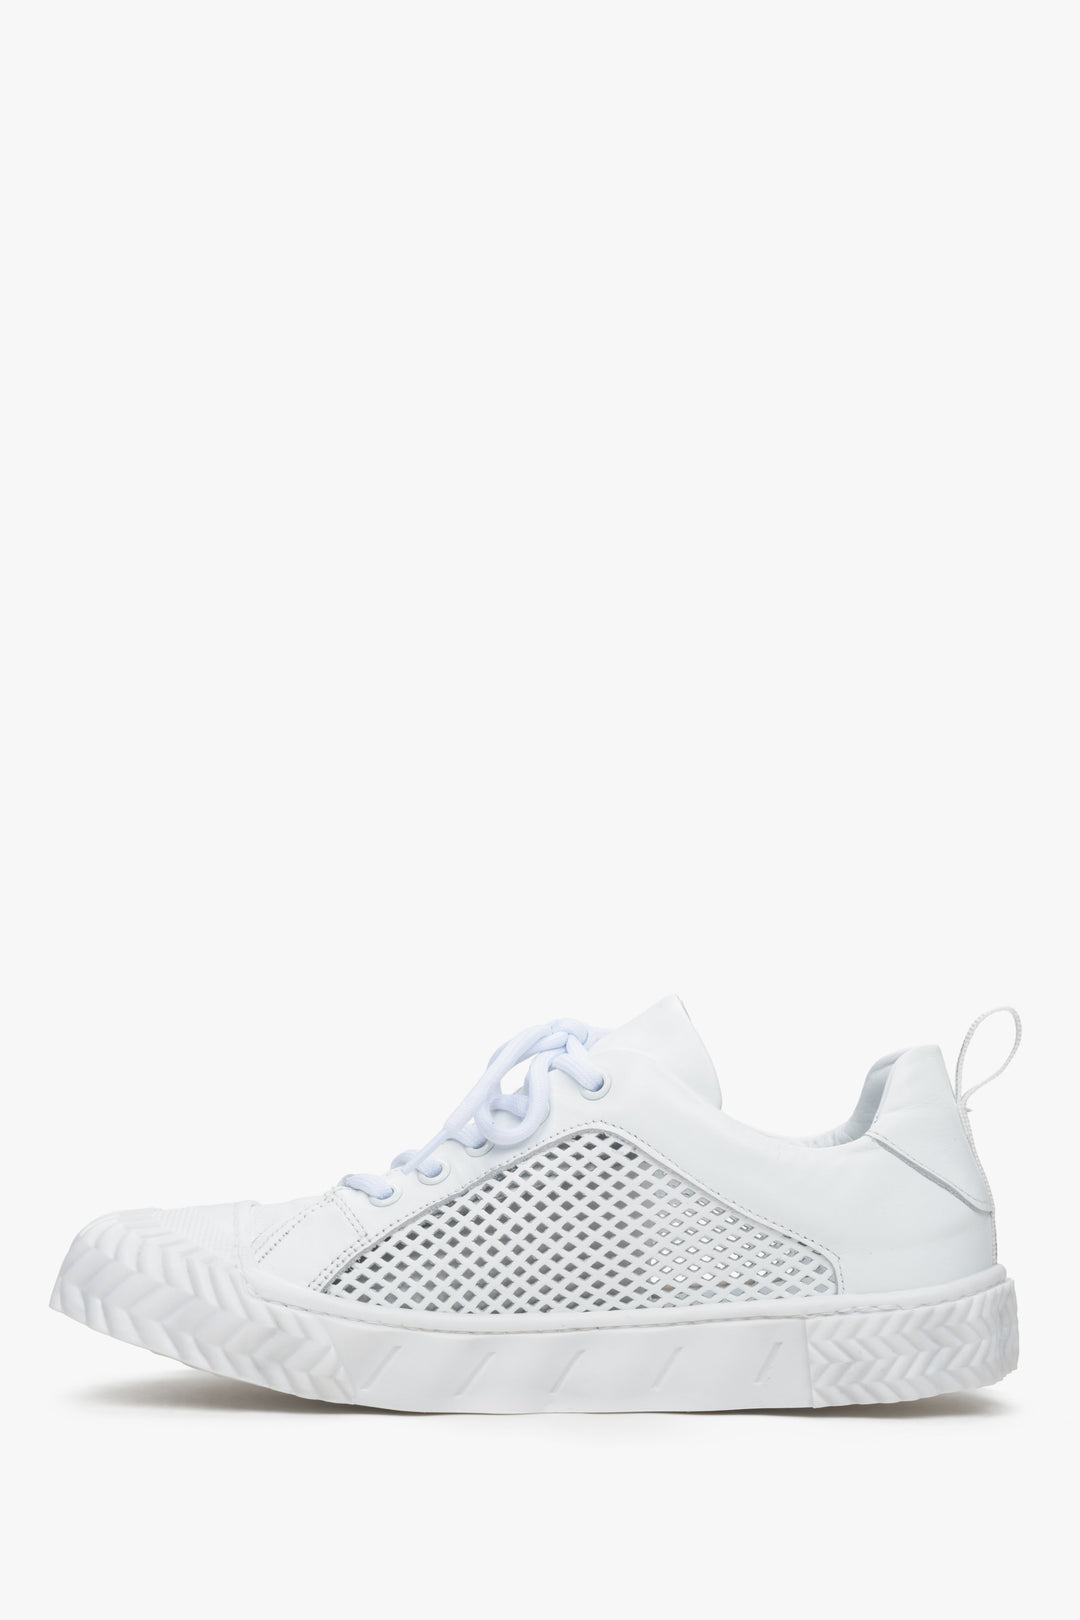 White women's sneakers by ES 8 made of natural leather with perforation and laces. 